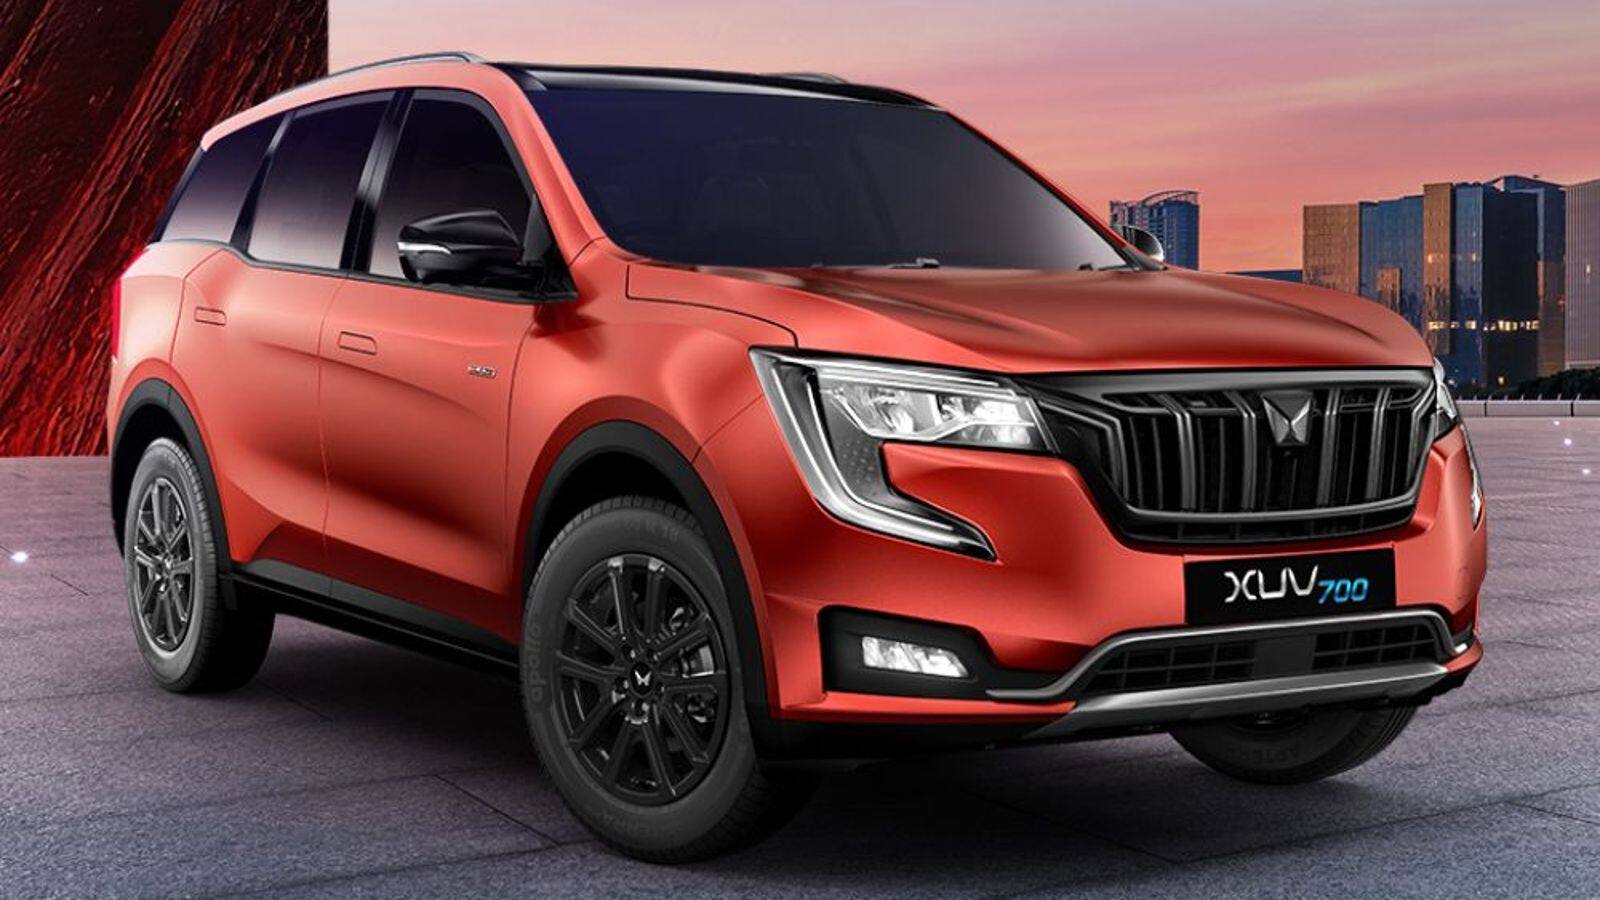 Mahindra launches affordable 7-seater diesel variant of XUV700 SUV